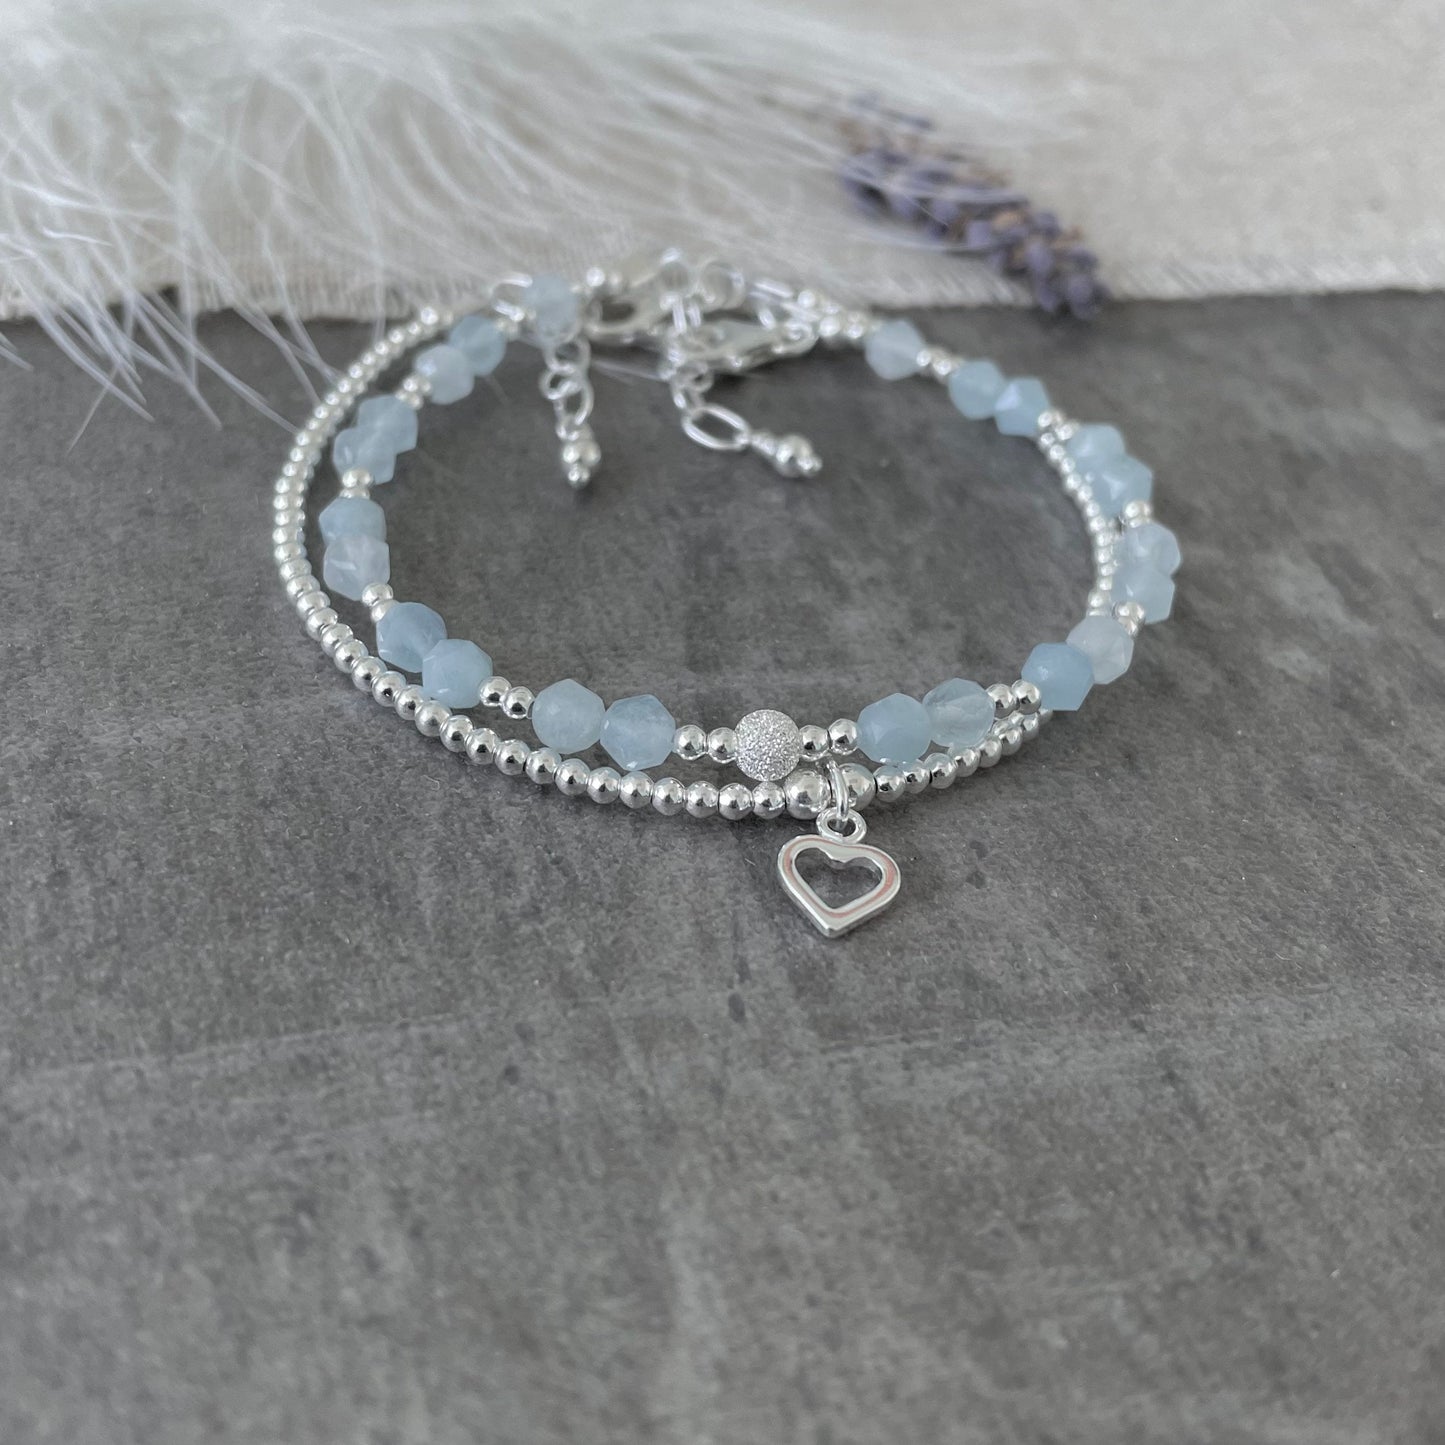 Aquamarine Bracelet Set made with March Birthstone and Sterling Silver, March Birthday Gift for Women